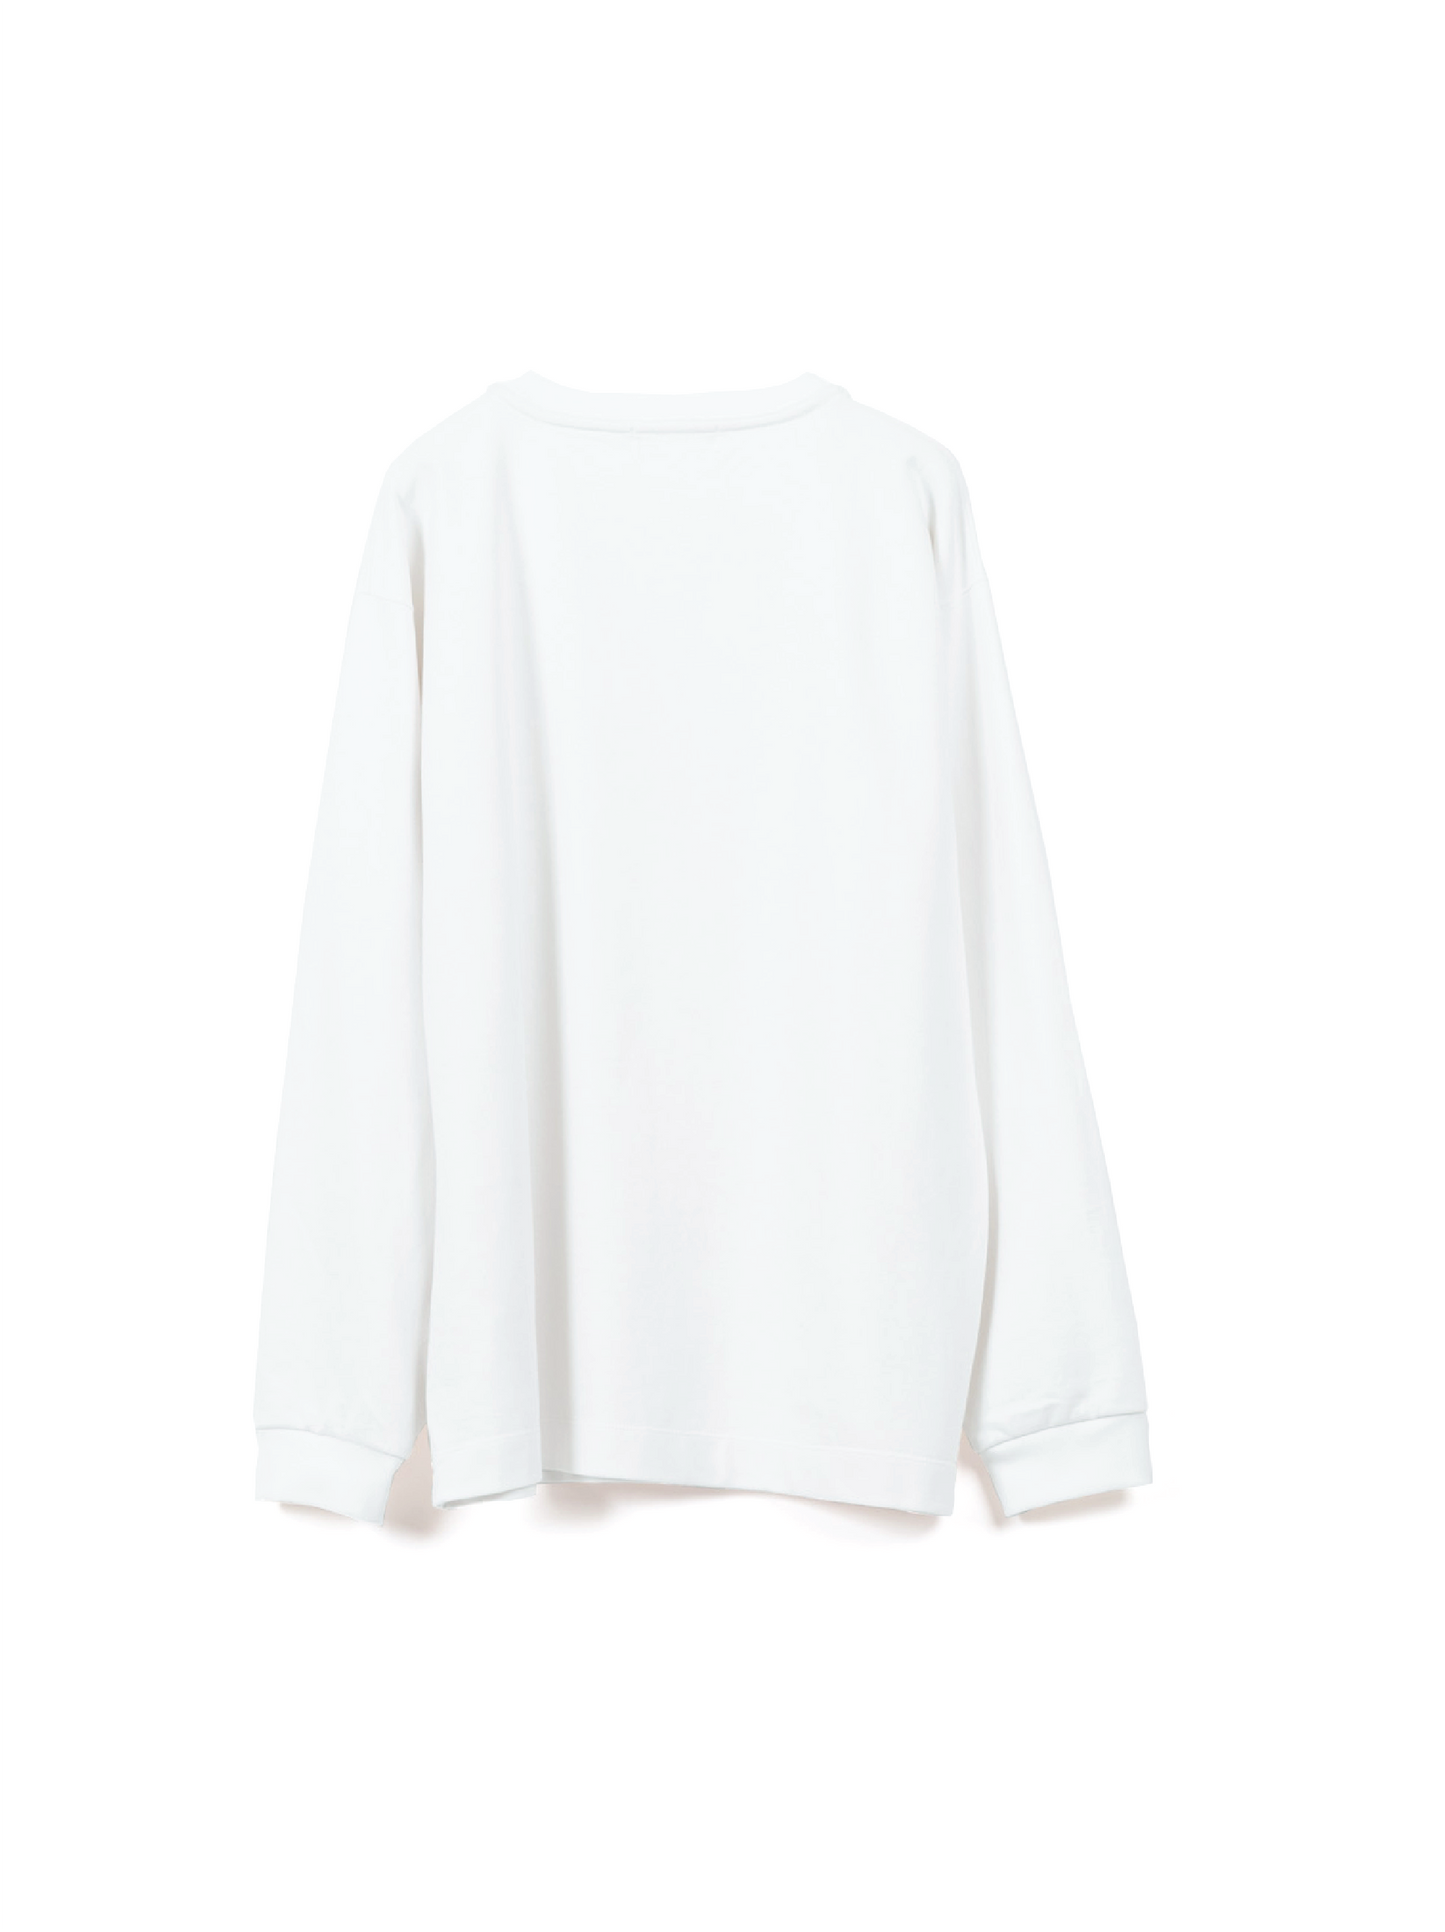 SUVIN COTTON HEAVY T-SHIRTS LONG SLEEVE ｜WHITE